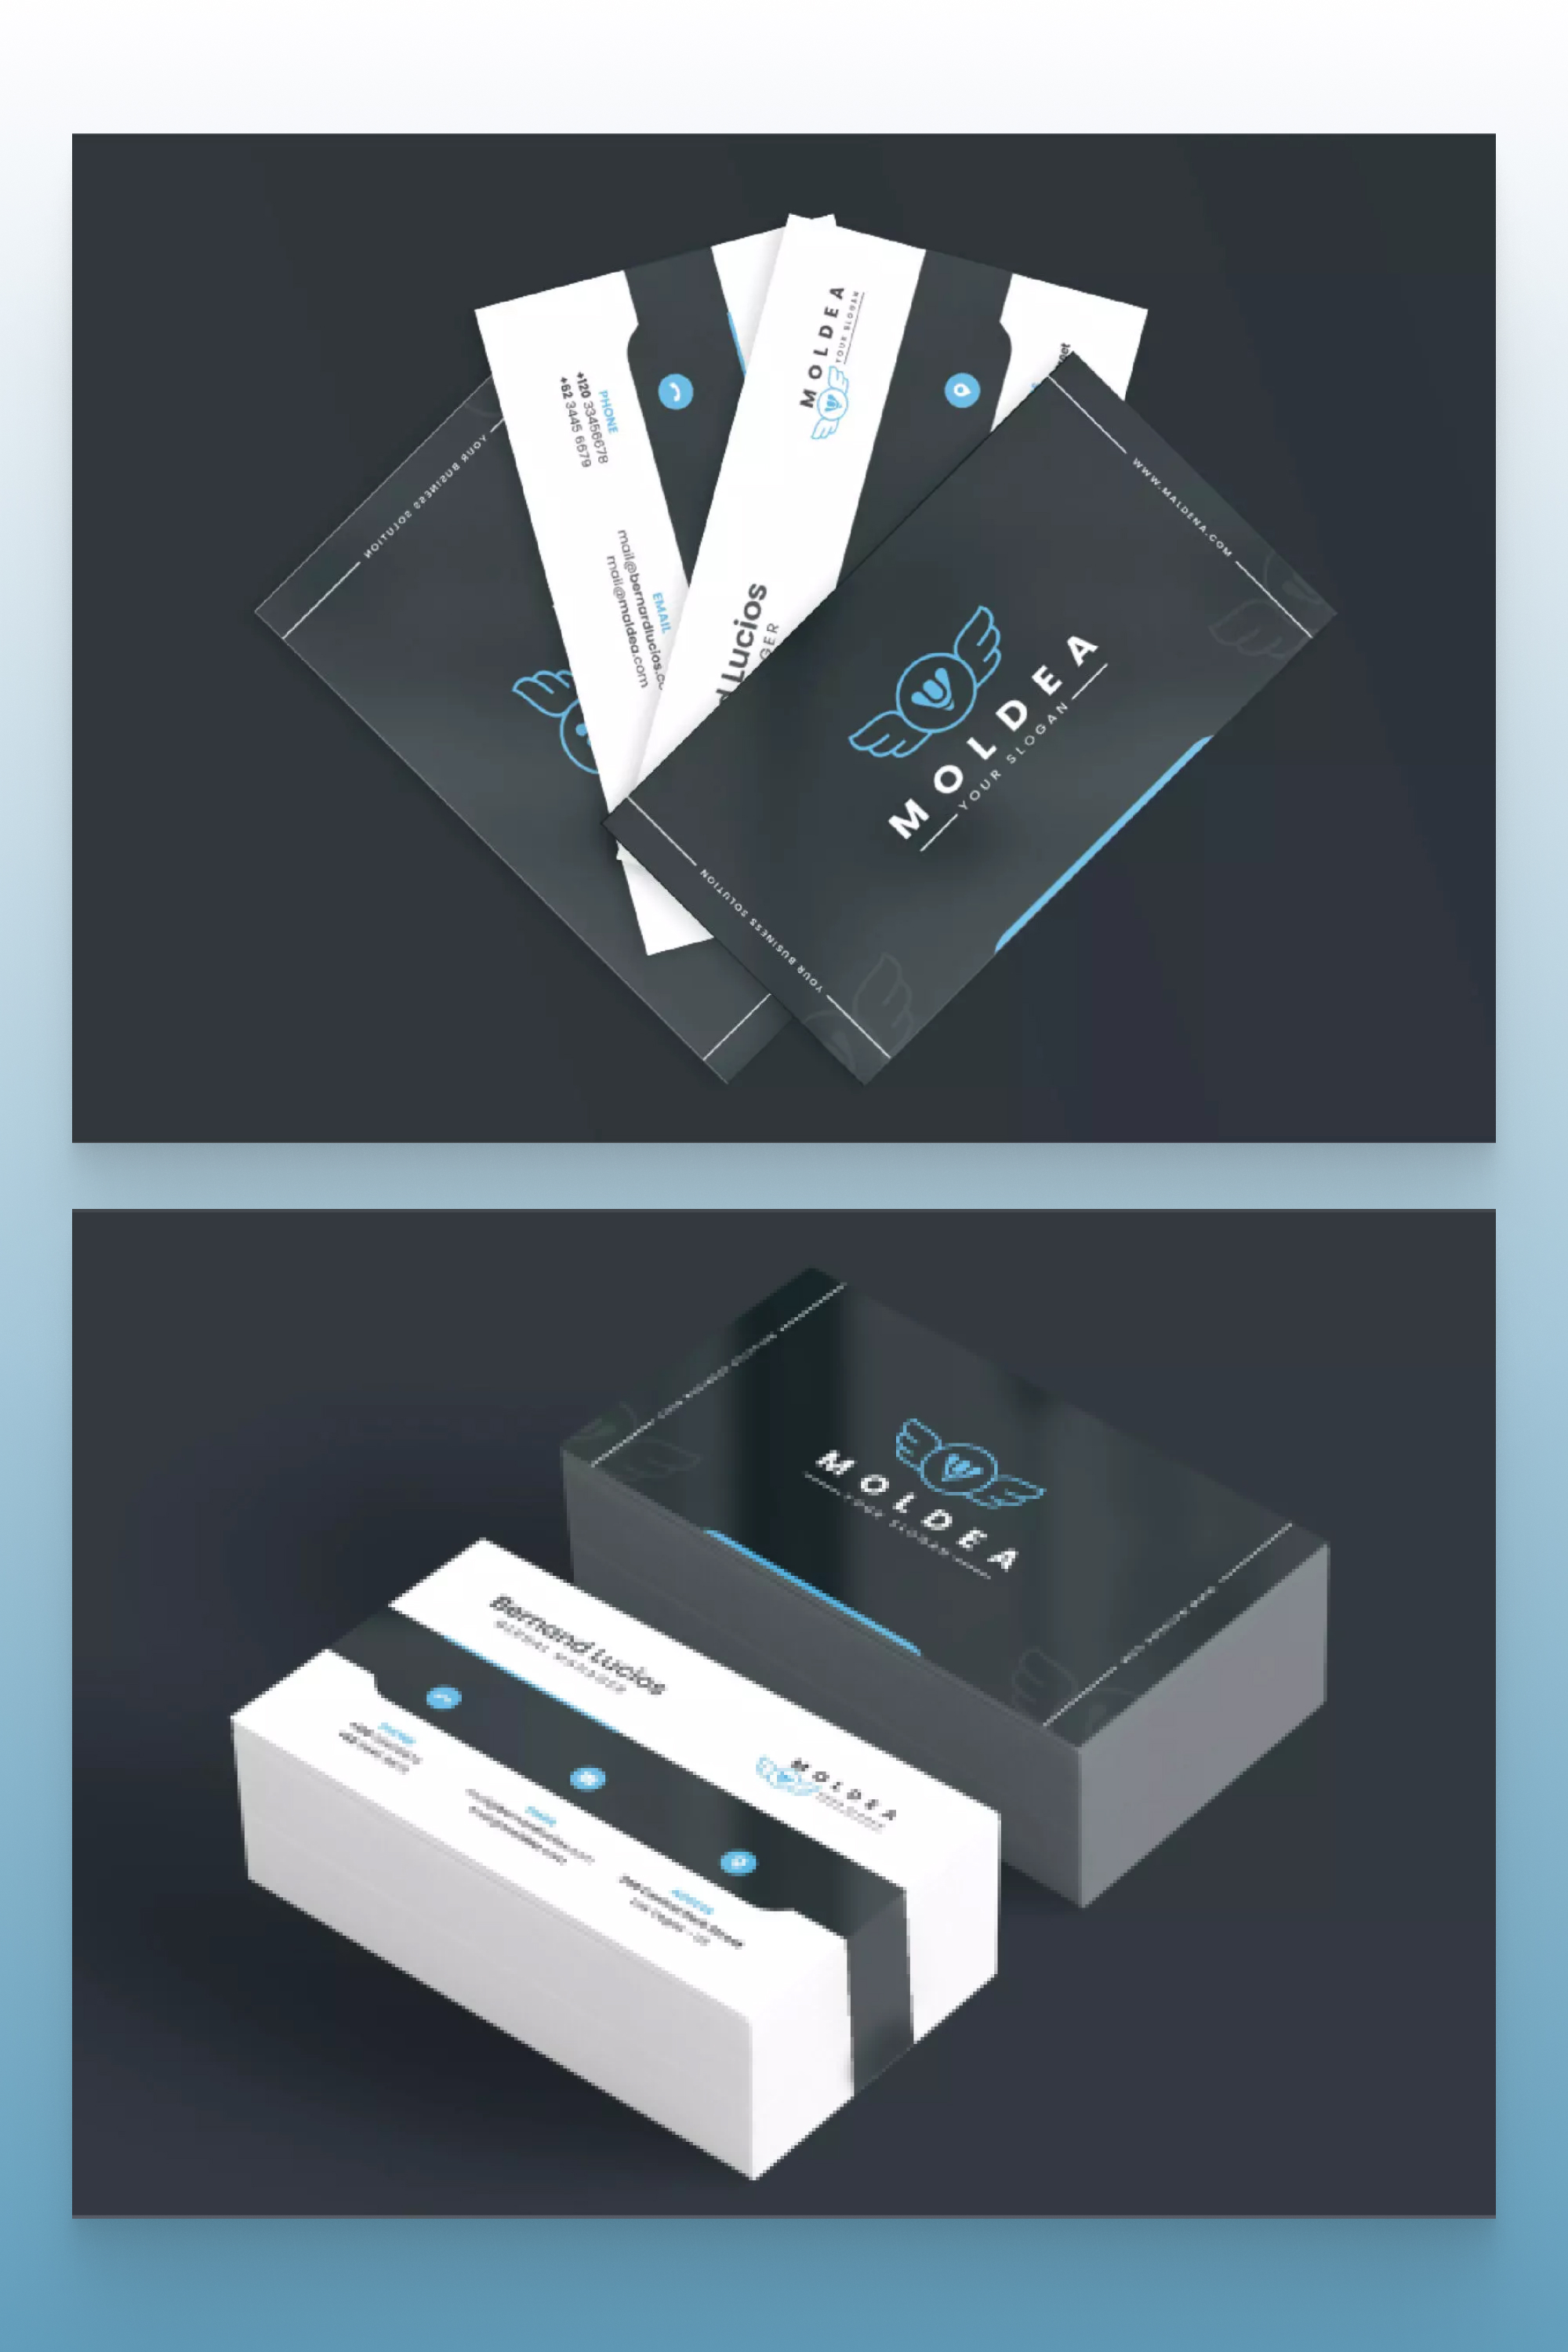 Stacks of Black and white business cards with blue accents on a black background.